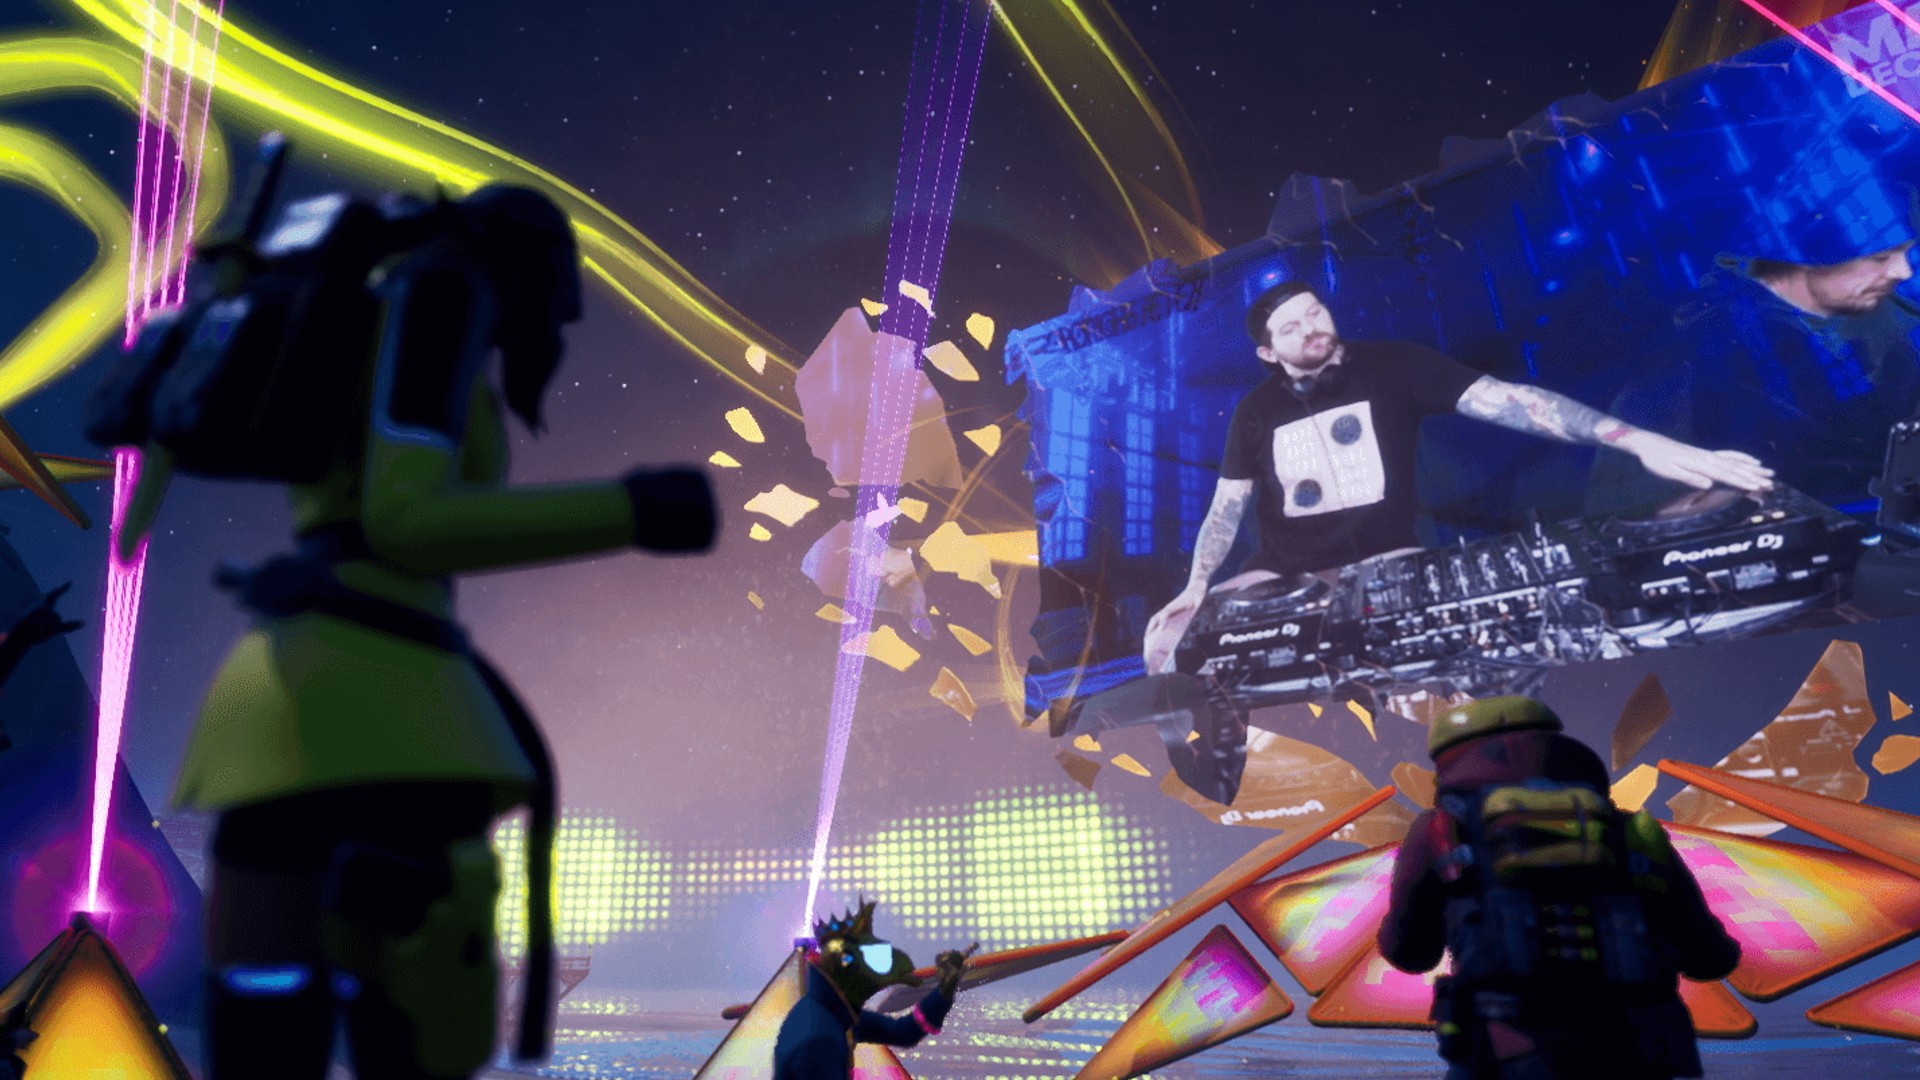 Deadmau5, Steve Aoki, and Dillon Francis to headline the Fortnite Party Royale premiere